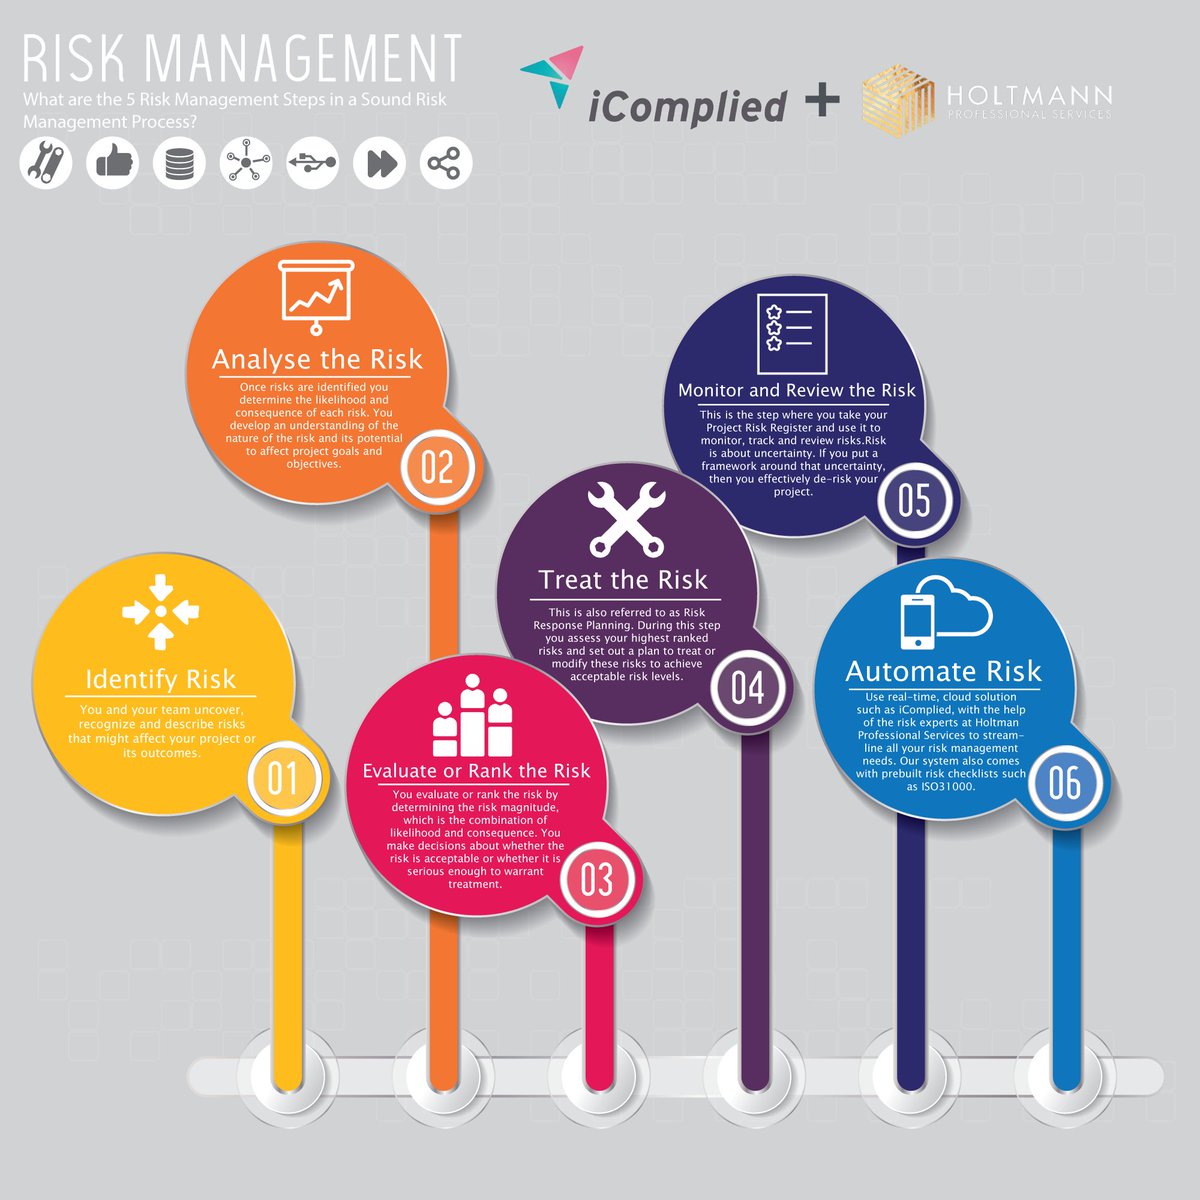 Infographic on changes in the new ISO 31000: 2018 standard. 
You can also access the ISO31000:2018 checklist when you sign up to iComplied for Free here: buff.ly/2JcS6ze
#riskmanagement #podcast #risk #compliance #tools